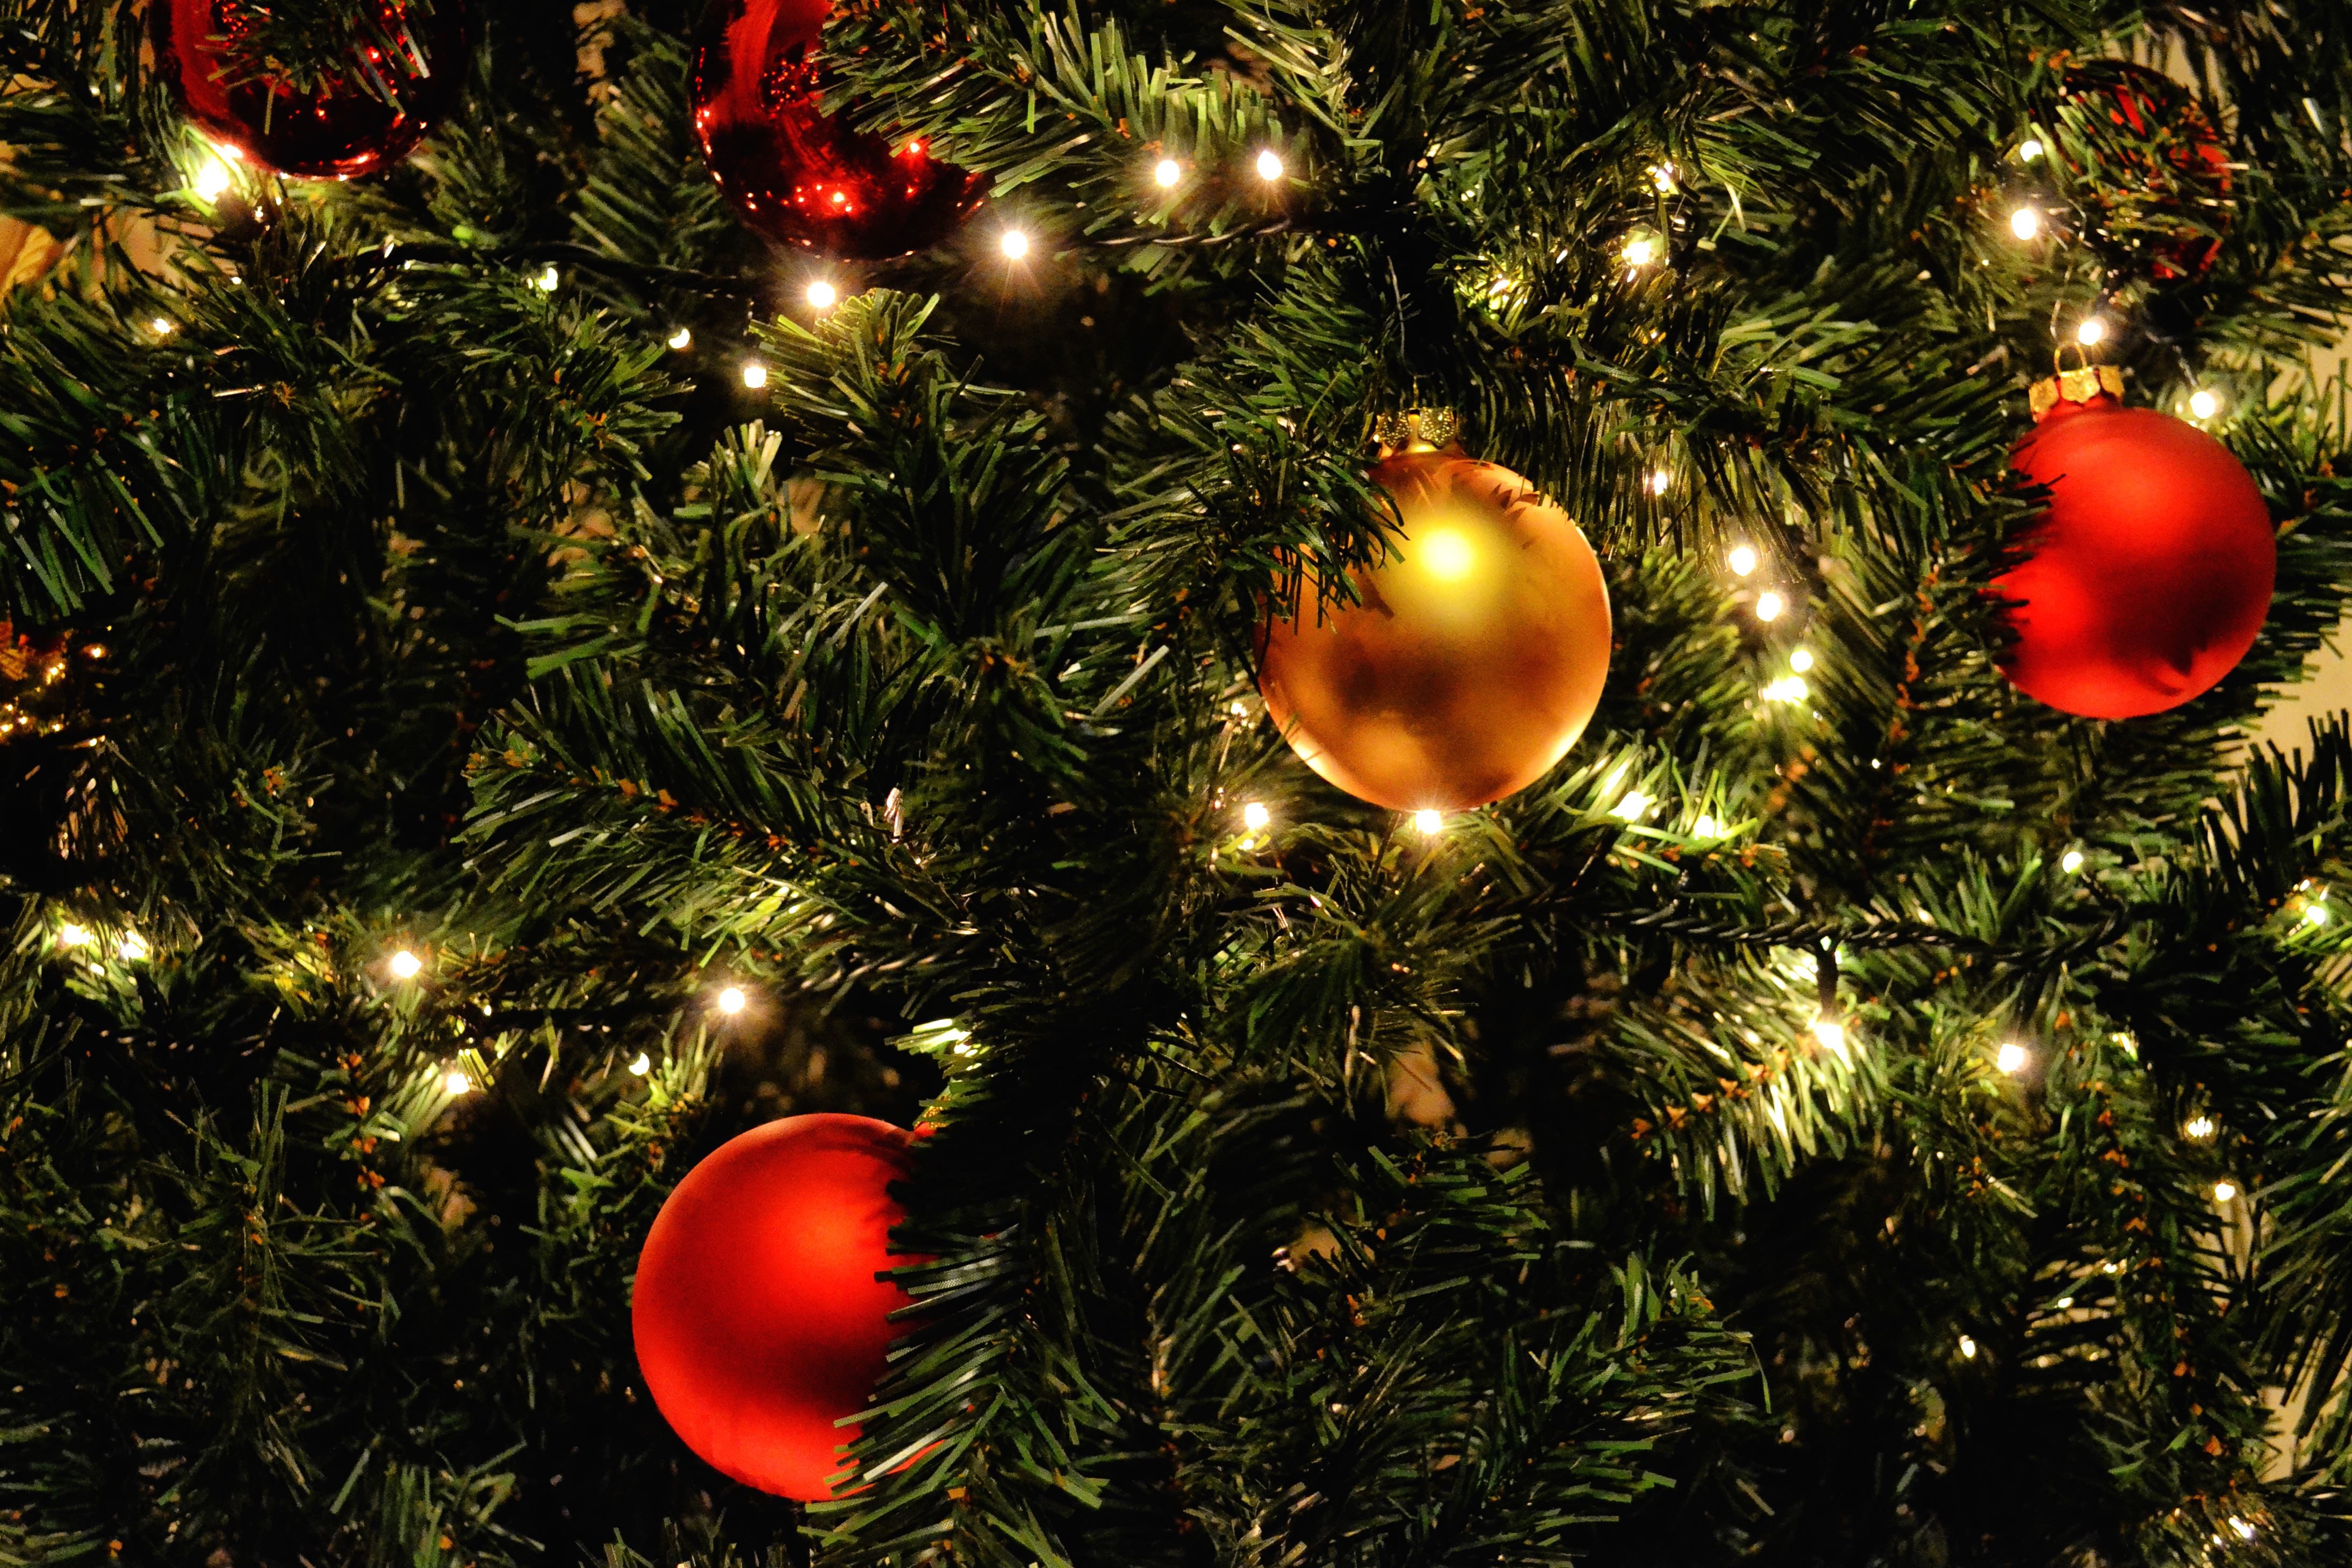 Free picture: decoration, sphere, spruce tree, Christmas, balls ...